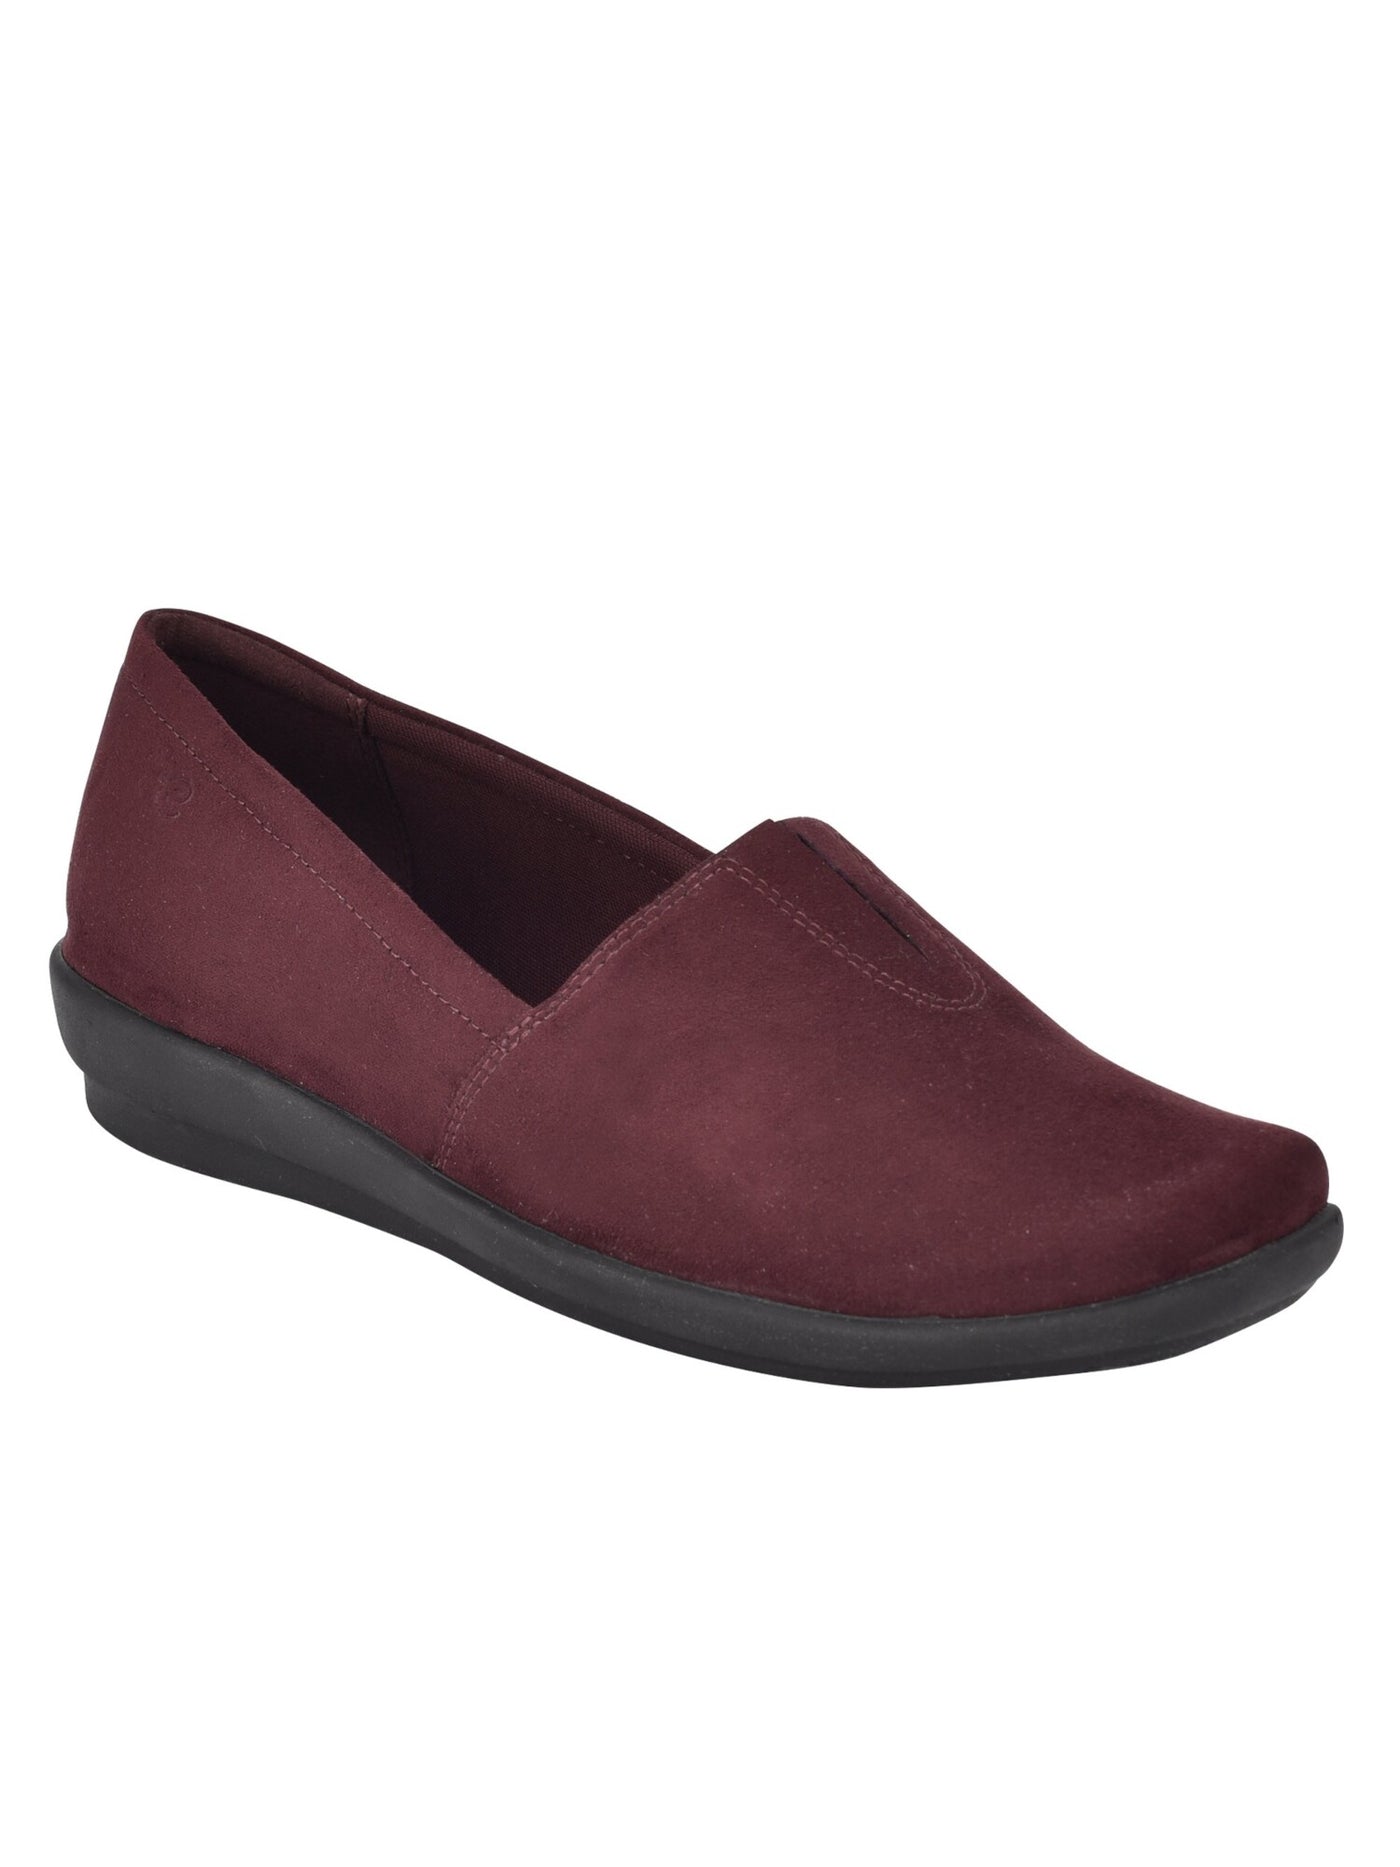 EASY SPIRIT Womens Maroon Arch Support Cushioned Acasia 3 Round Toe Wedge Slip On Ballet Flats 7.5 M